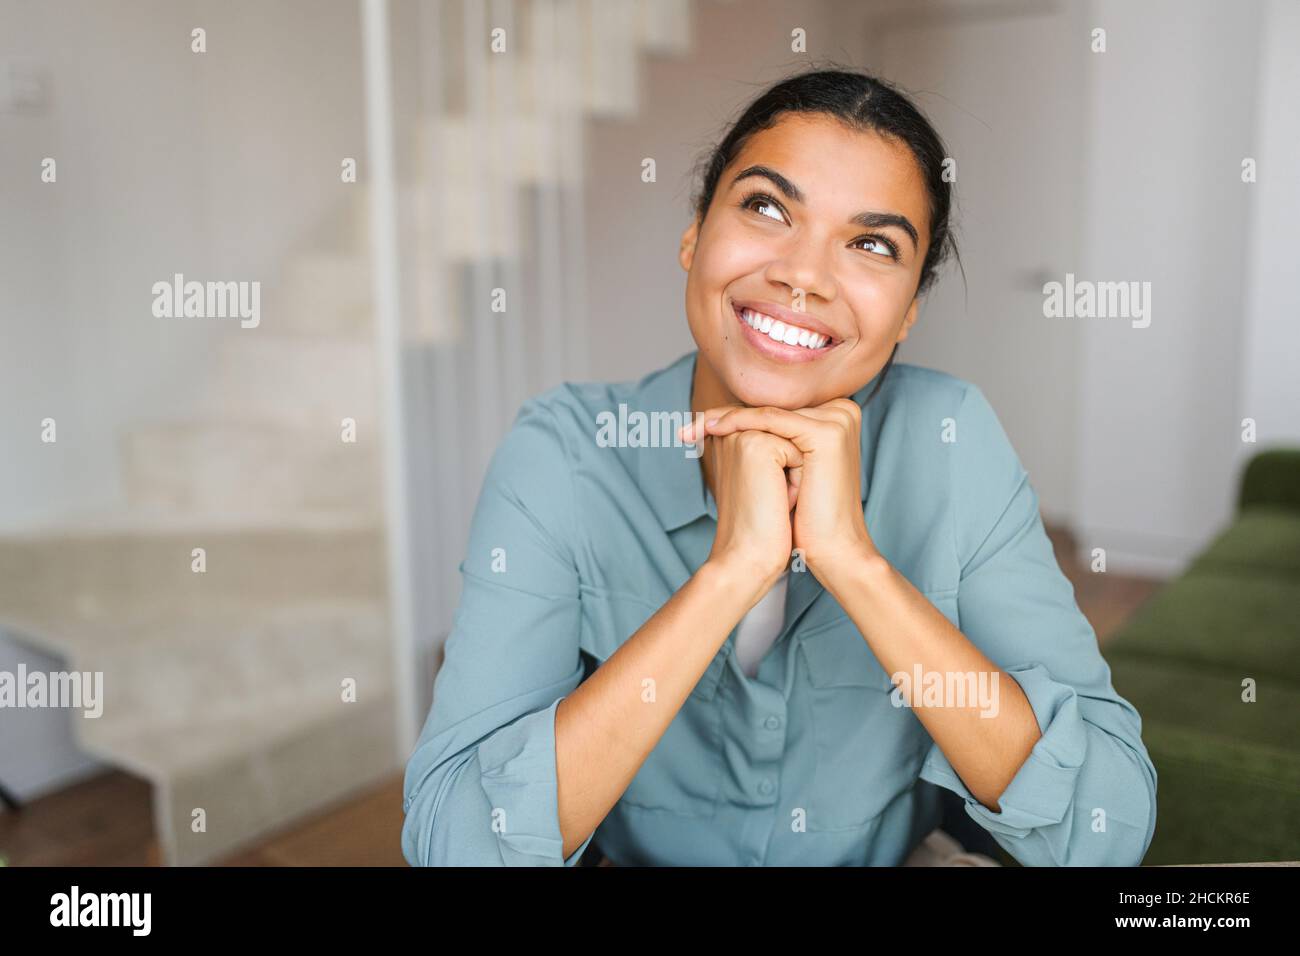 Headshot of young dreaming African American ethnic female with beautiful smile and looking away while sitting against blurred home or office interior background Stock Photo